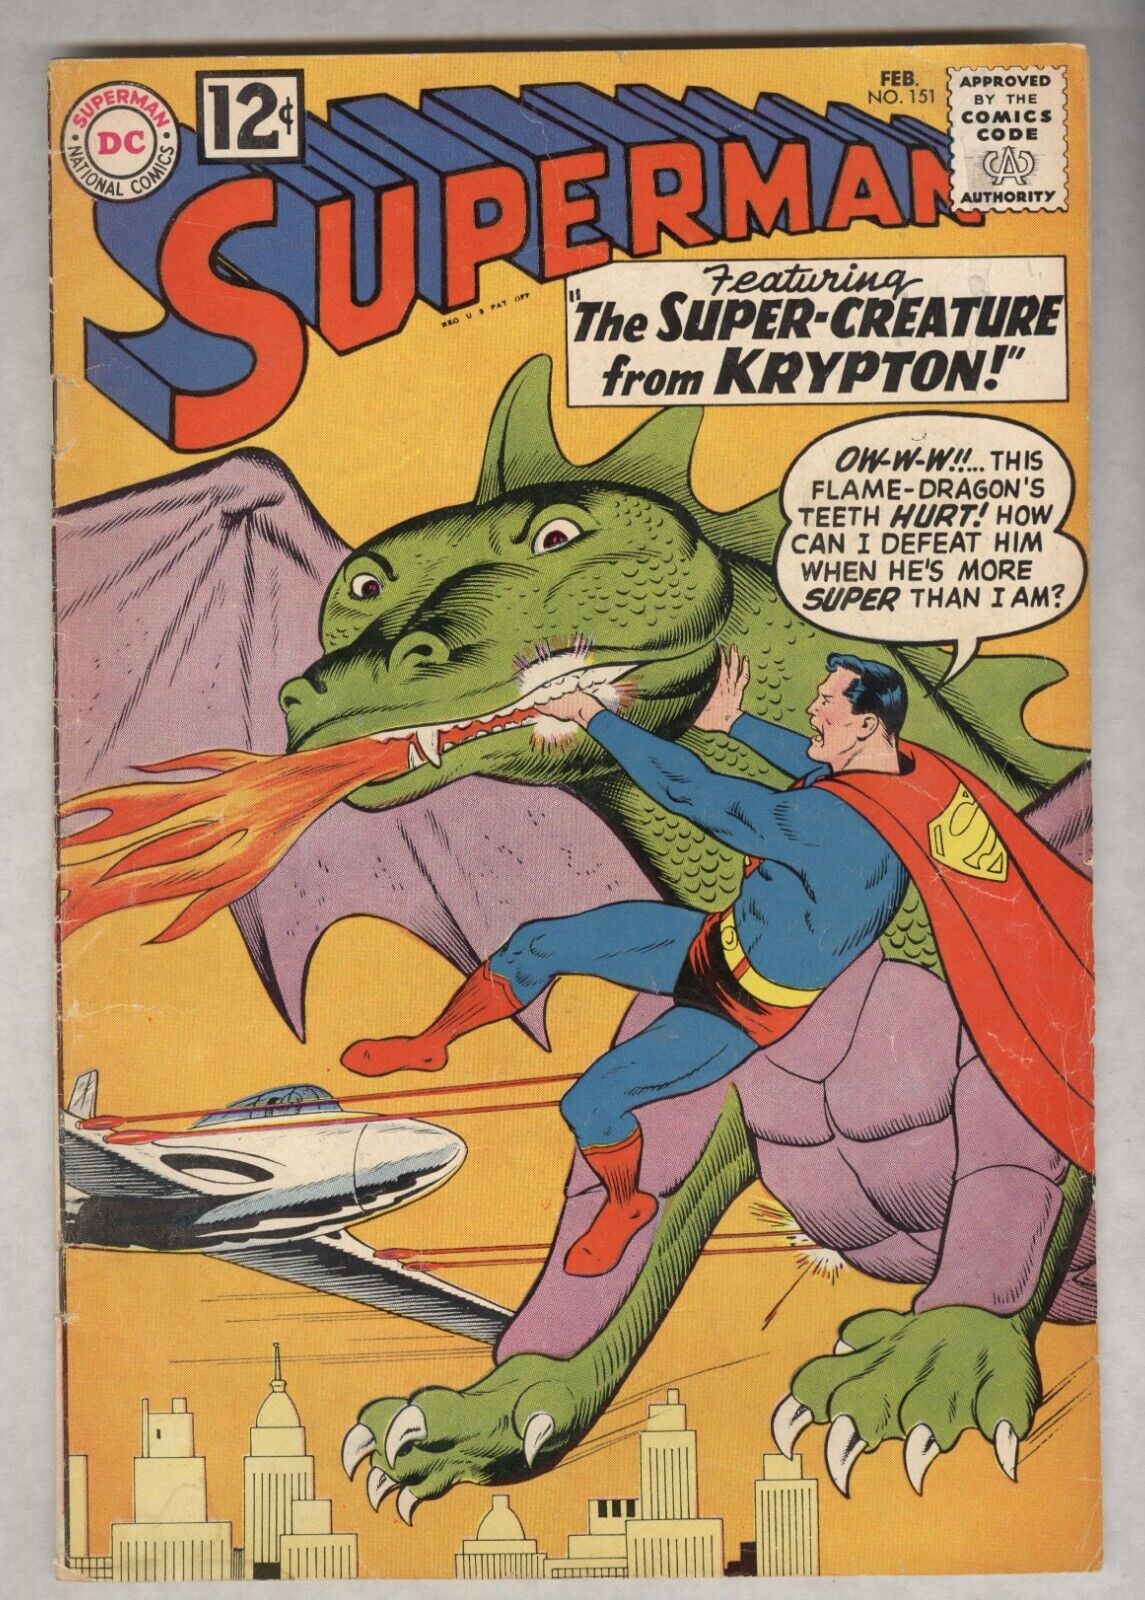 Superman #151 February 1962 VG Super-Creature from Krypton